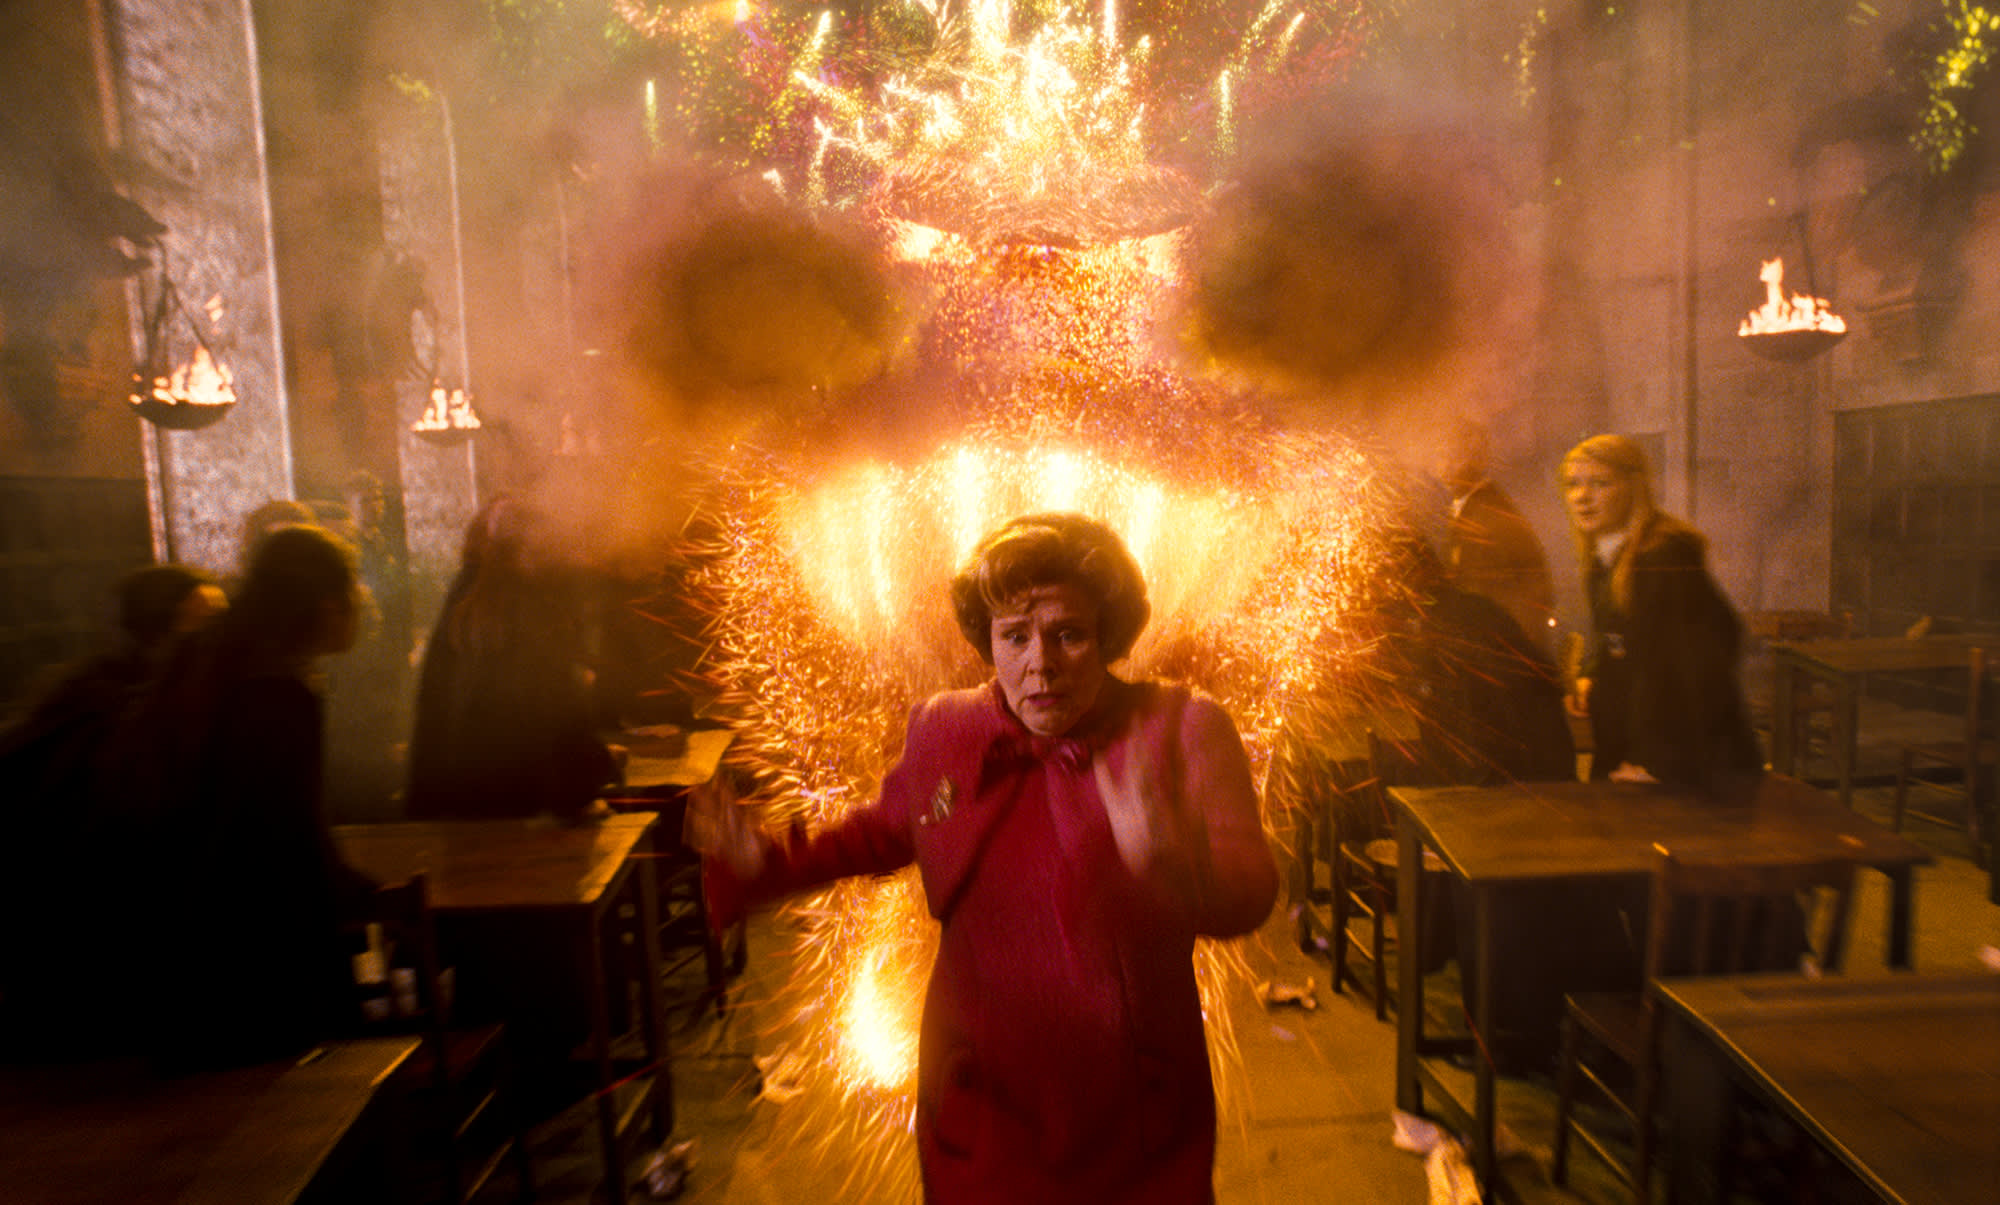 Professor Umbridge being chased through the Great Hall by a fireworks in the shape of a large dragon.